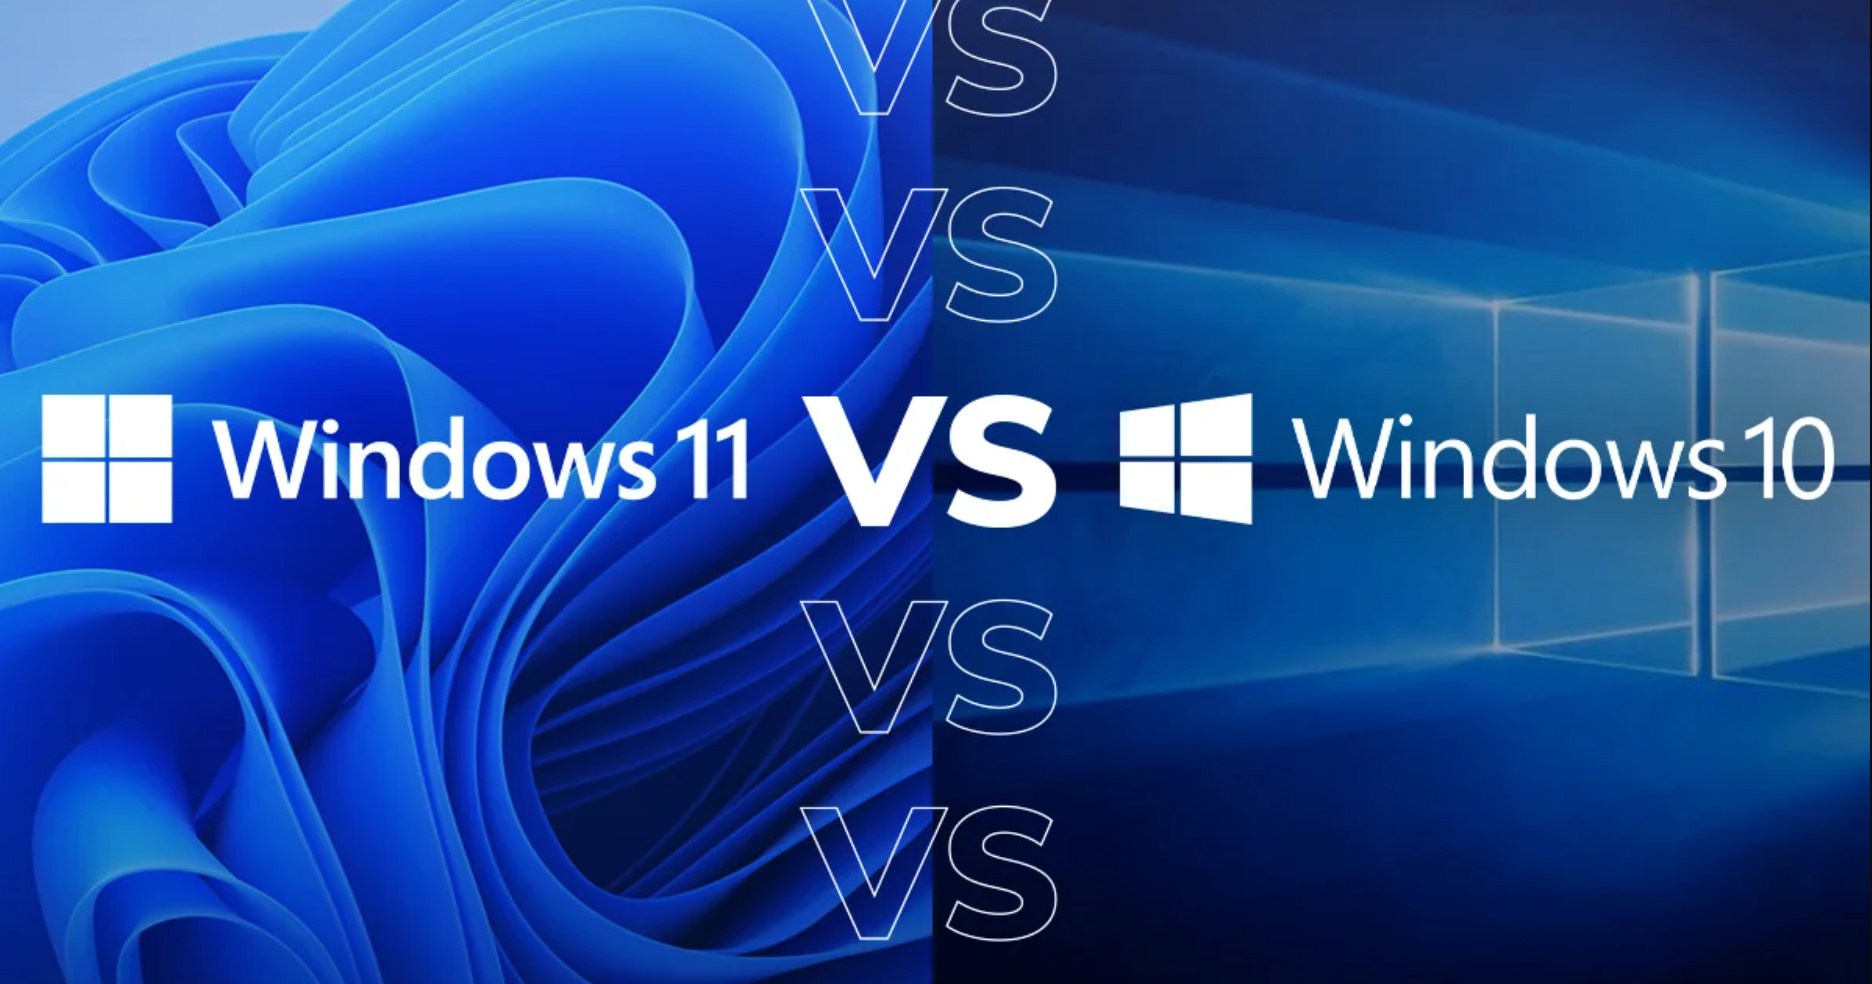 Windows 11 vs. Windows 10: A Comparison of Performance and Features